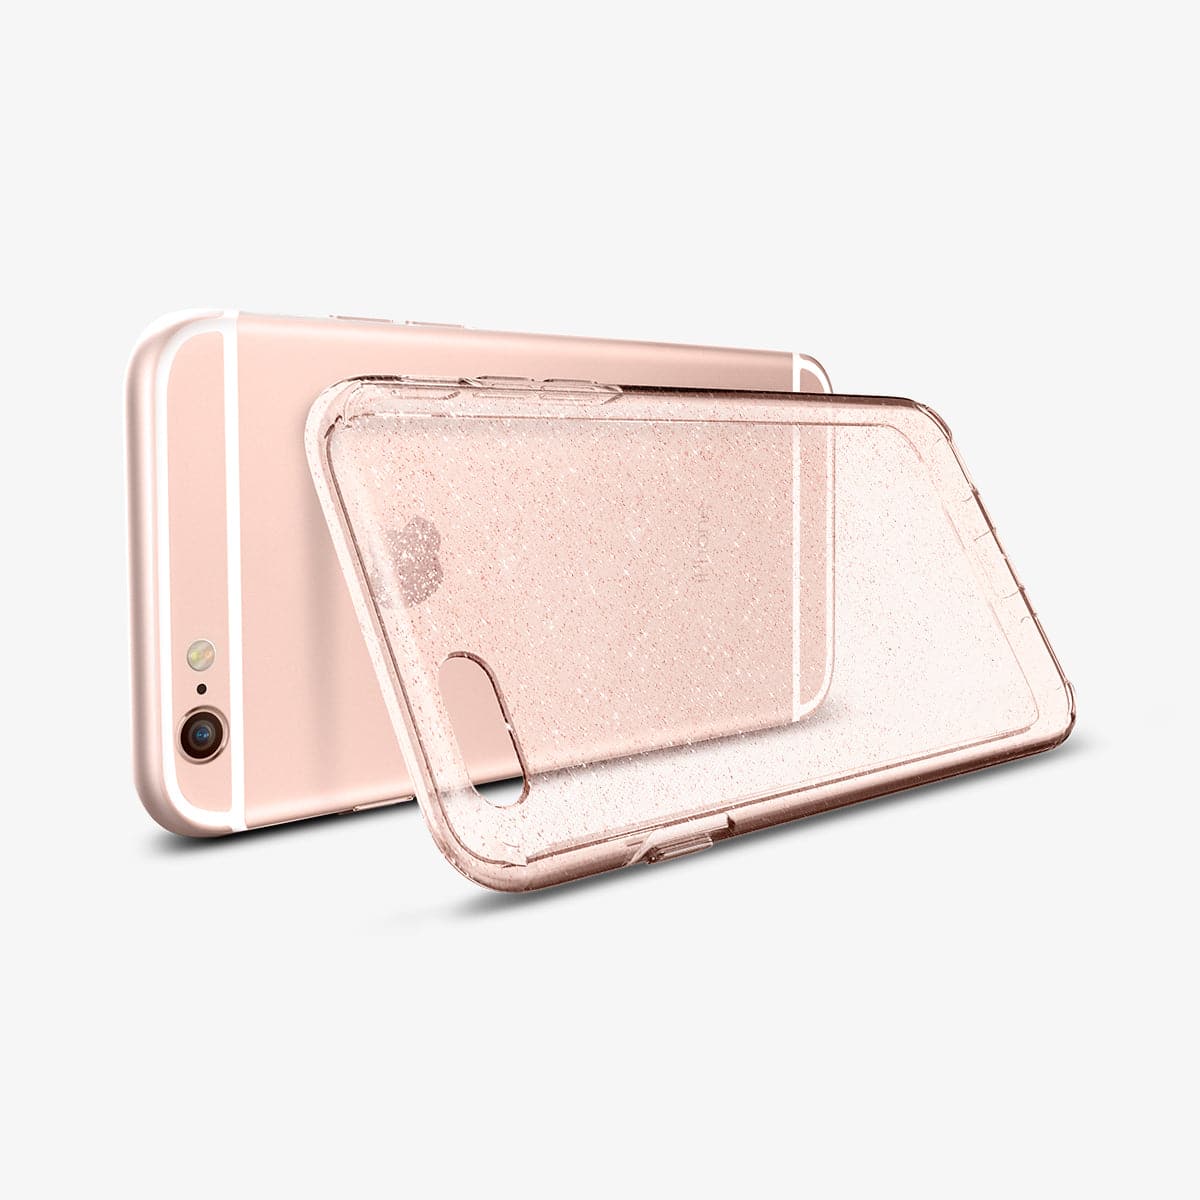 035CS21416 - iPhone 6 Series Liquid Crystal Glitter Case in rose quartz showing the back with case leaning against the device